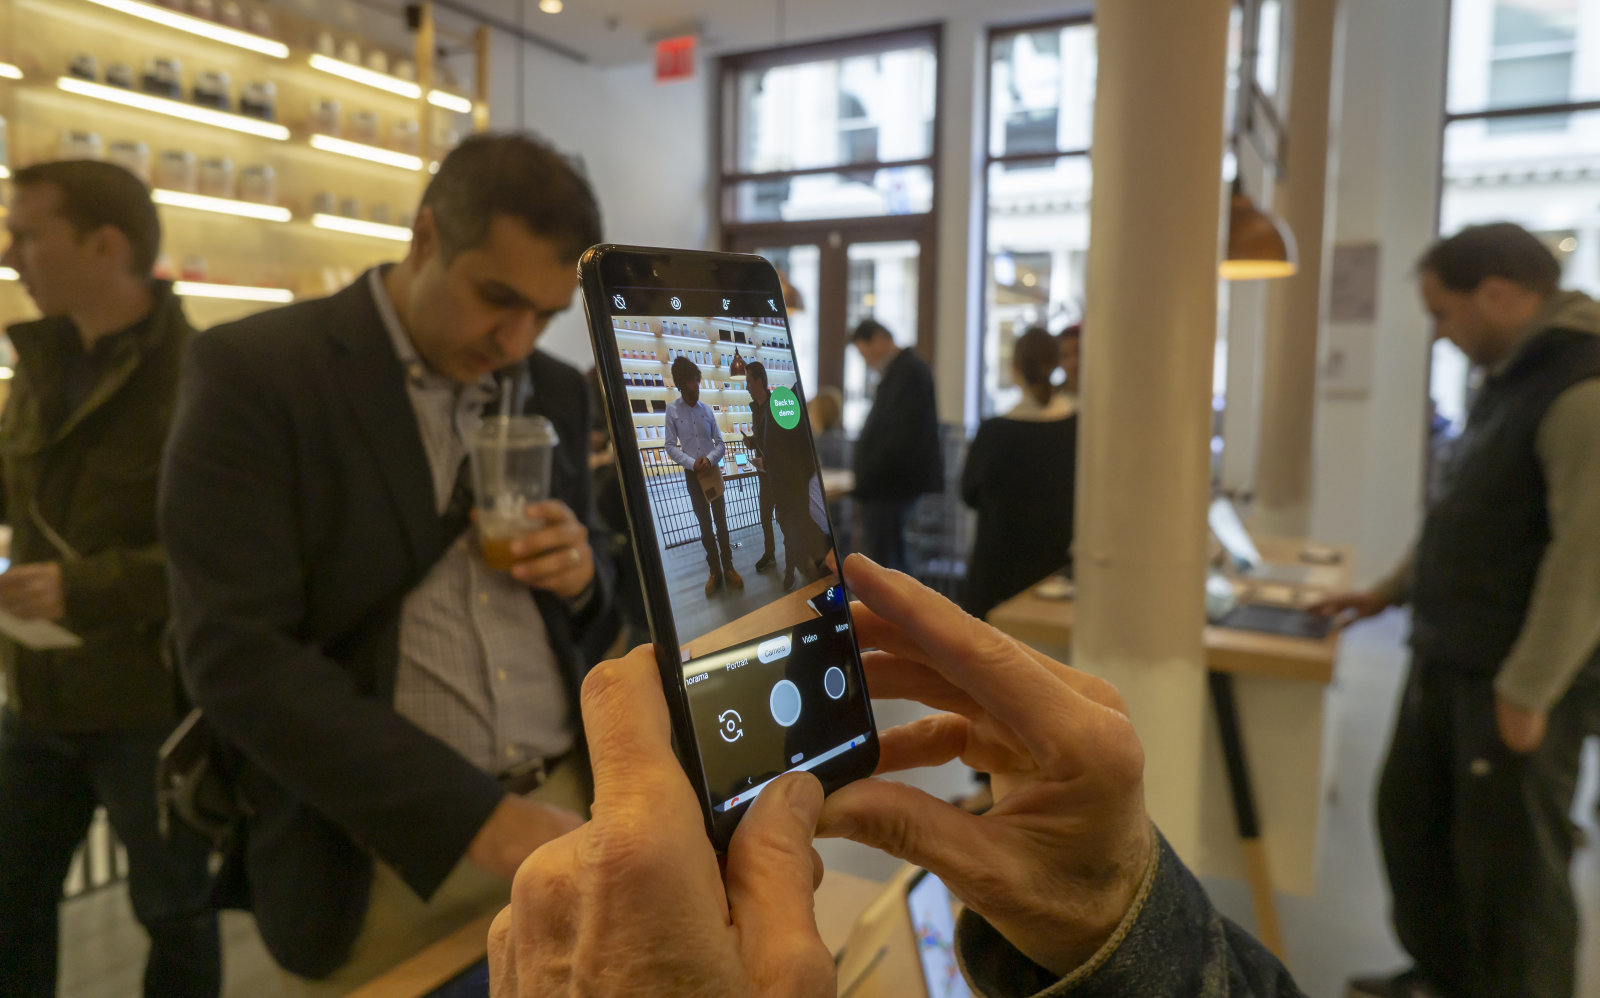 A visitor tries out a Pixel 3 smartphone in the Google Hardware Store in the Soho neighborhood of New York on its grand opening day, Thursday, October 18, 2018. The store displays a variety of products from Google such as Google Home appliances and the new Pixel 3 smartphones and provides experiential shopping for customers. (ÂPhoto by Richard B. Levine)